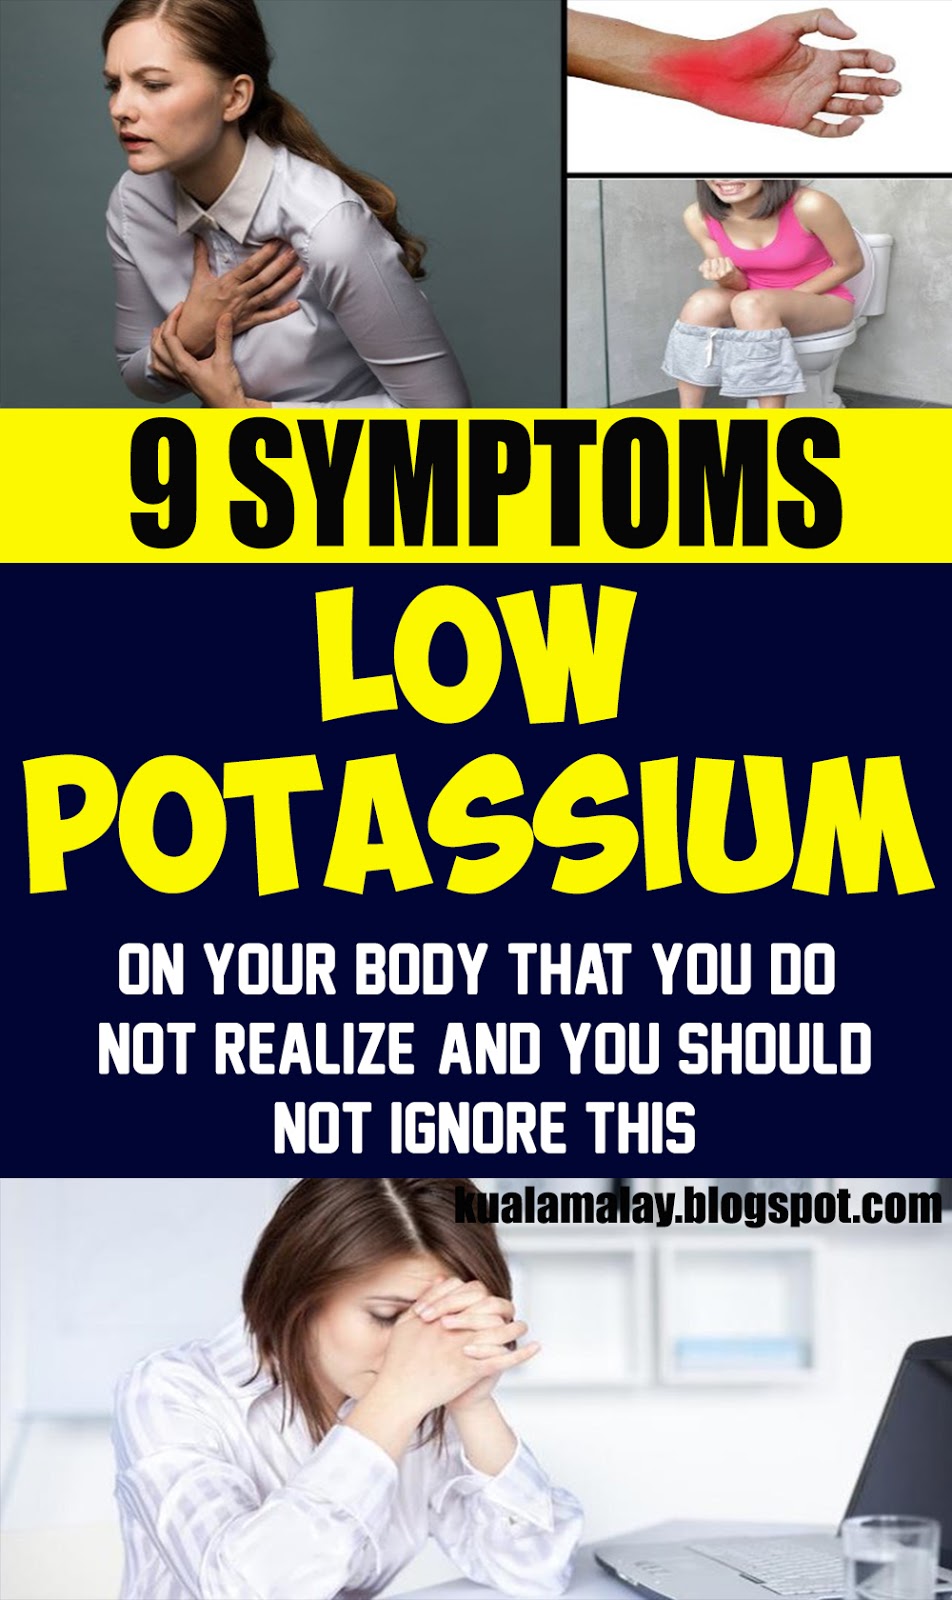 9 Symptoms Of Low Potassium Levels In Your Body That You Should Not Ignore